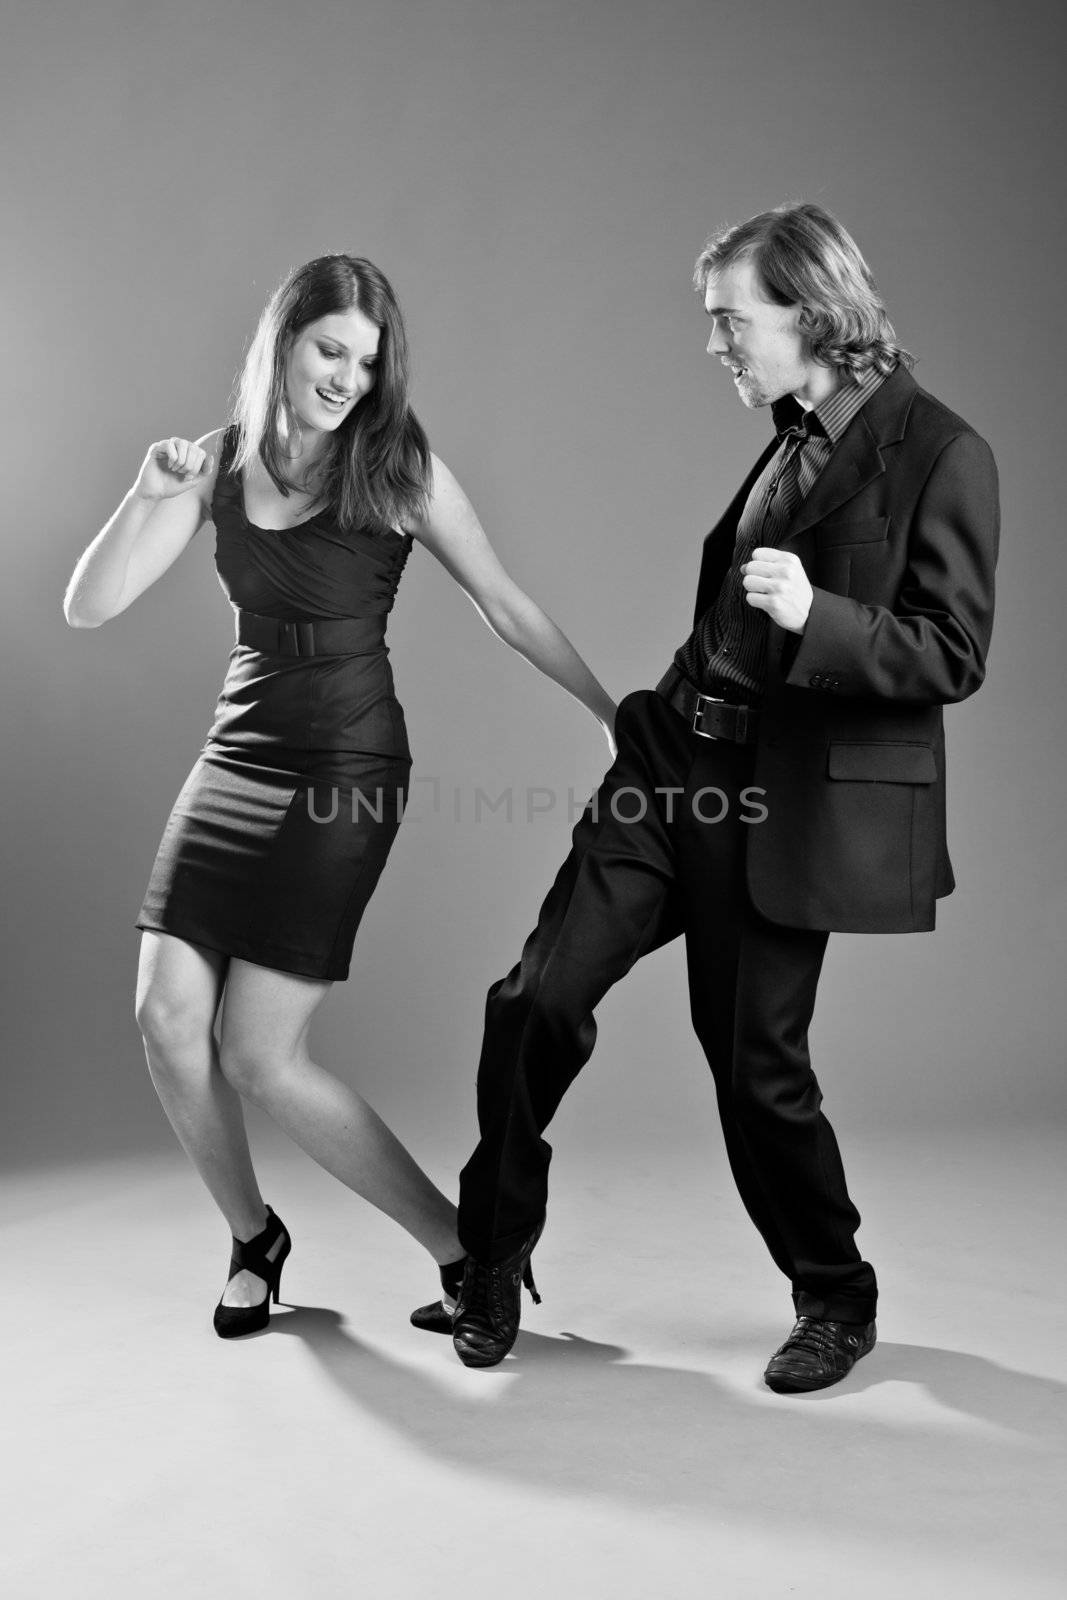 Dancing couple by Fotosmurf